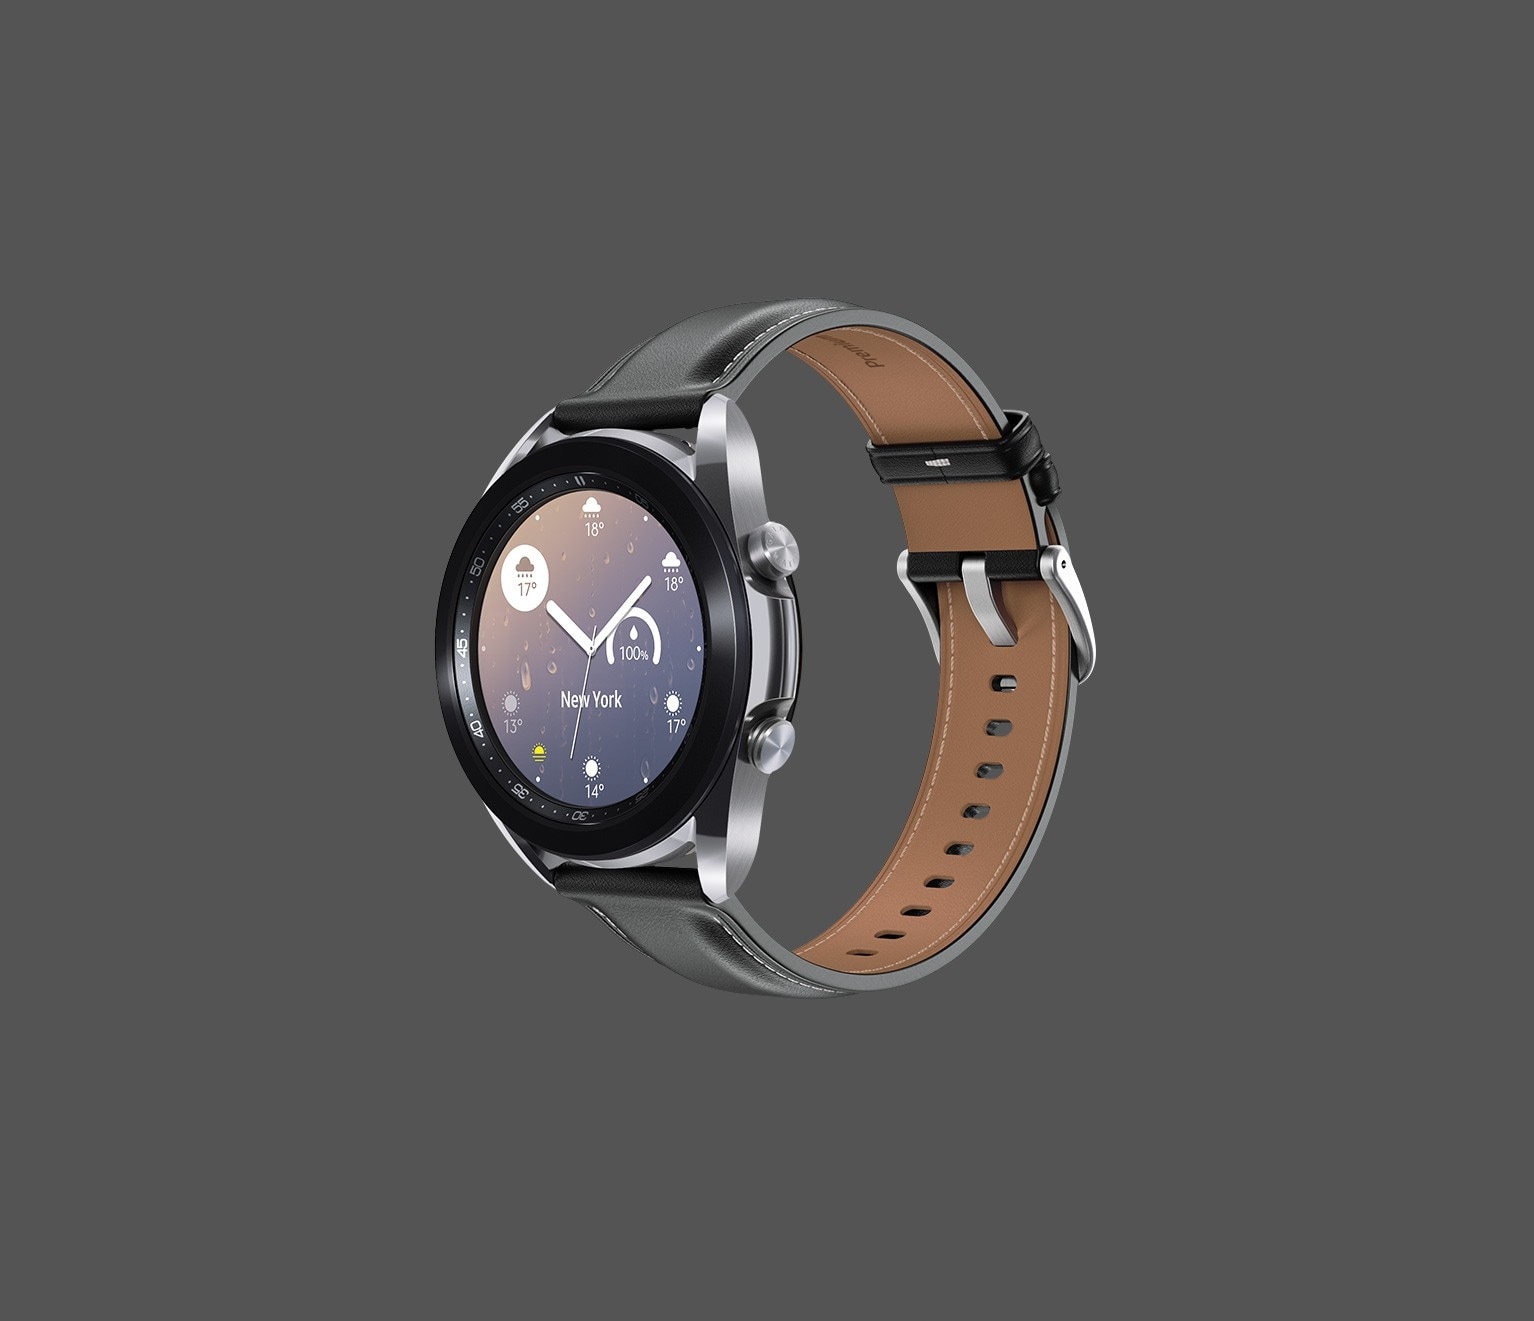 41mm Galaxy Watch3 in Mystic Silver with an Analog Modular Watch Face seen from an angle